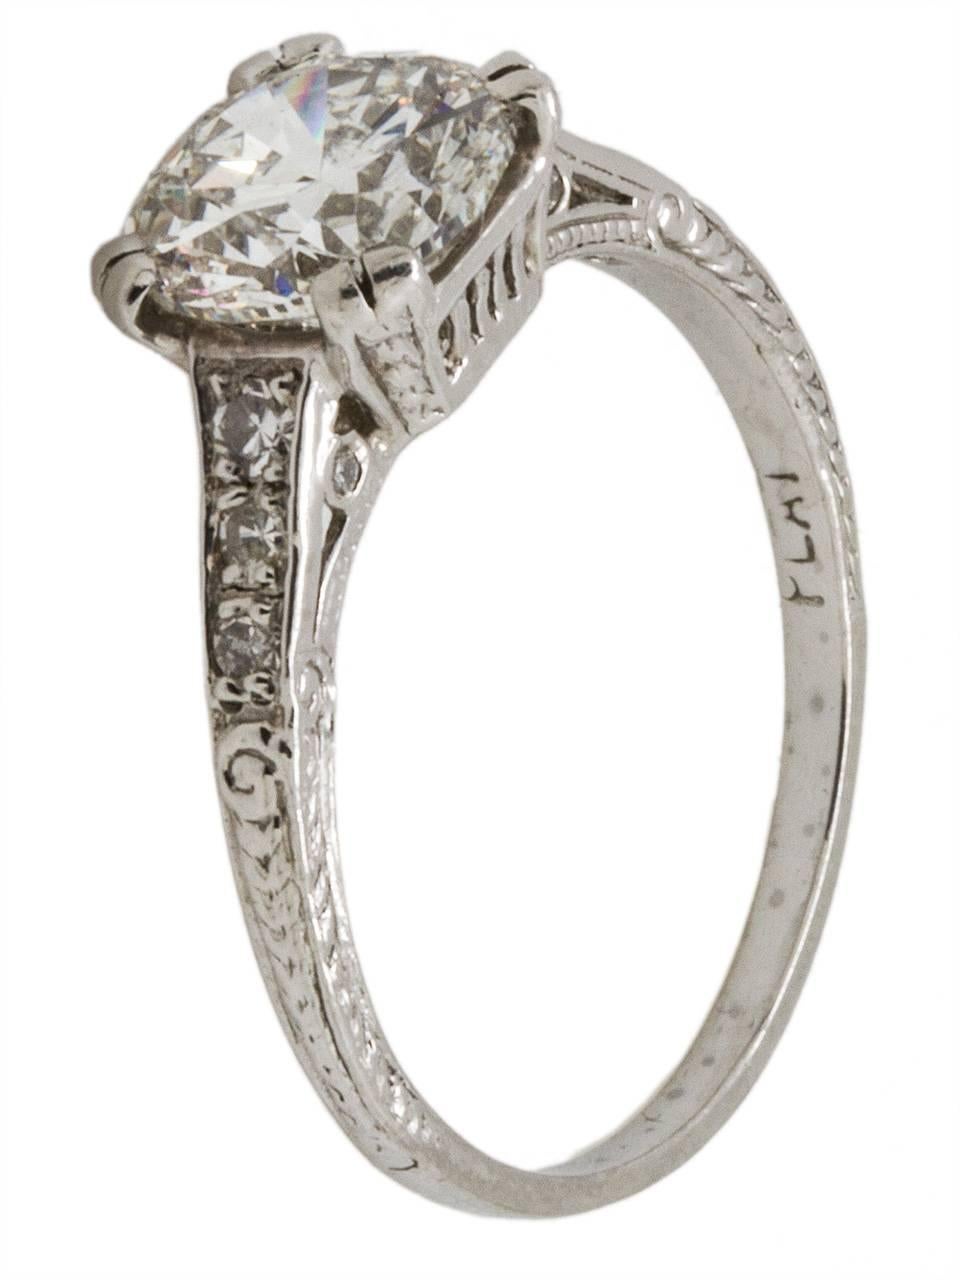 Wonderfully detailed "new vintage" platinum engagement ring starring an impressive 1.52ct round brilliant center diamond, H-SI2. Six bead set round side diamonds adorn the narrow, tapered shank. Beautifully executed engraving details